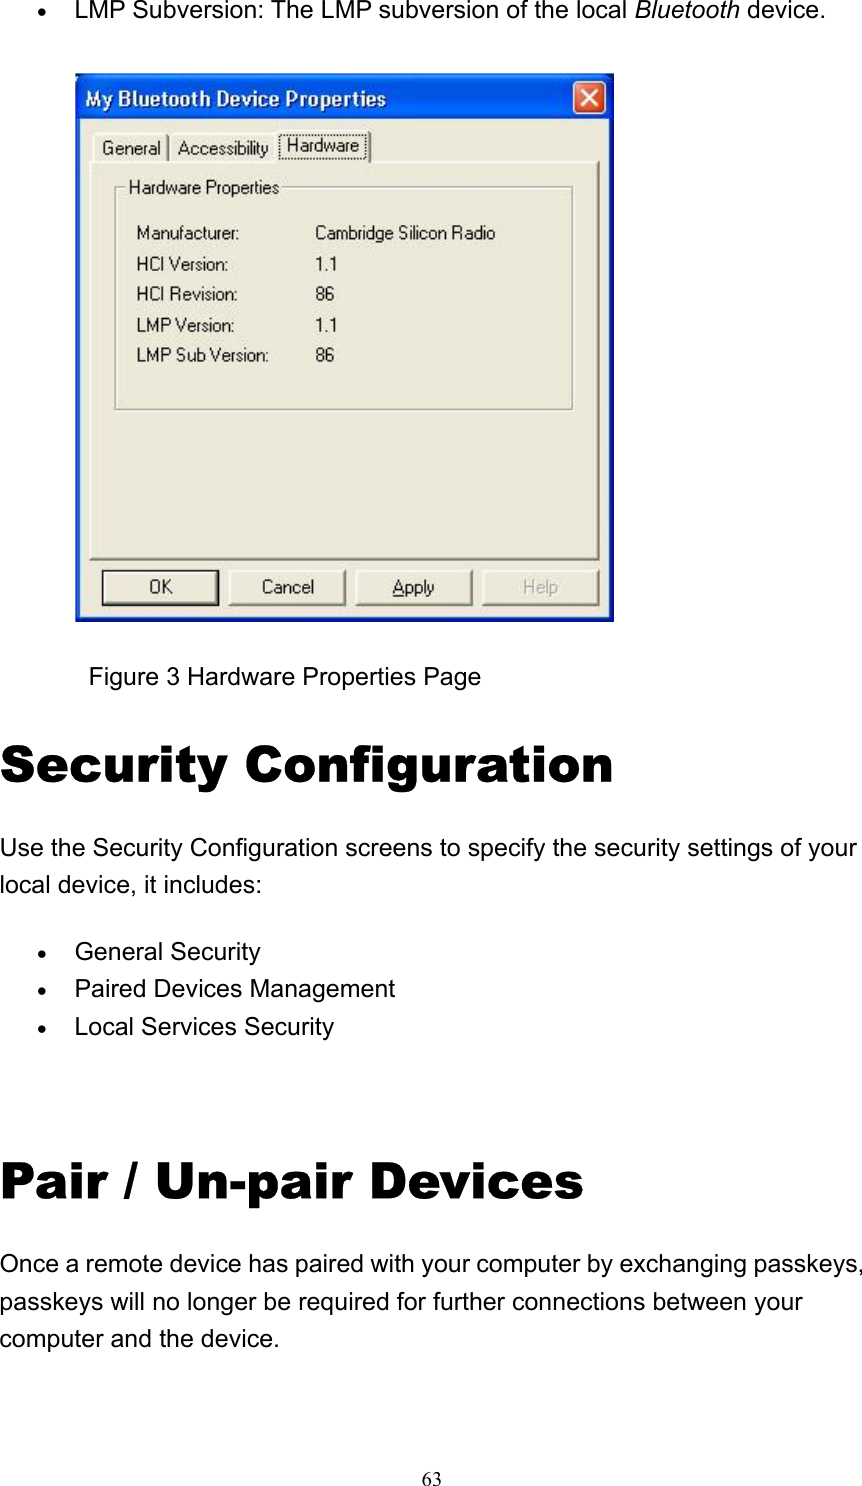   63• LMP Subversion: The LMP subversion of the local Bluetooth device.                Figure 3 Hardware Properties Page Security Configuration Use the Security Configuration screens to specify the security settings of your local device, it includes: • General Security   • Paired Devices Management   • Local Services Security     Pair / Un-pair Devices Once a remote device has paired with your computer by exchanging passkeys, passkeys will no longer be required for further connections between your computer and the device. 